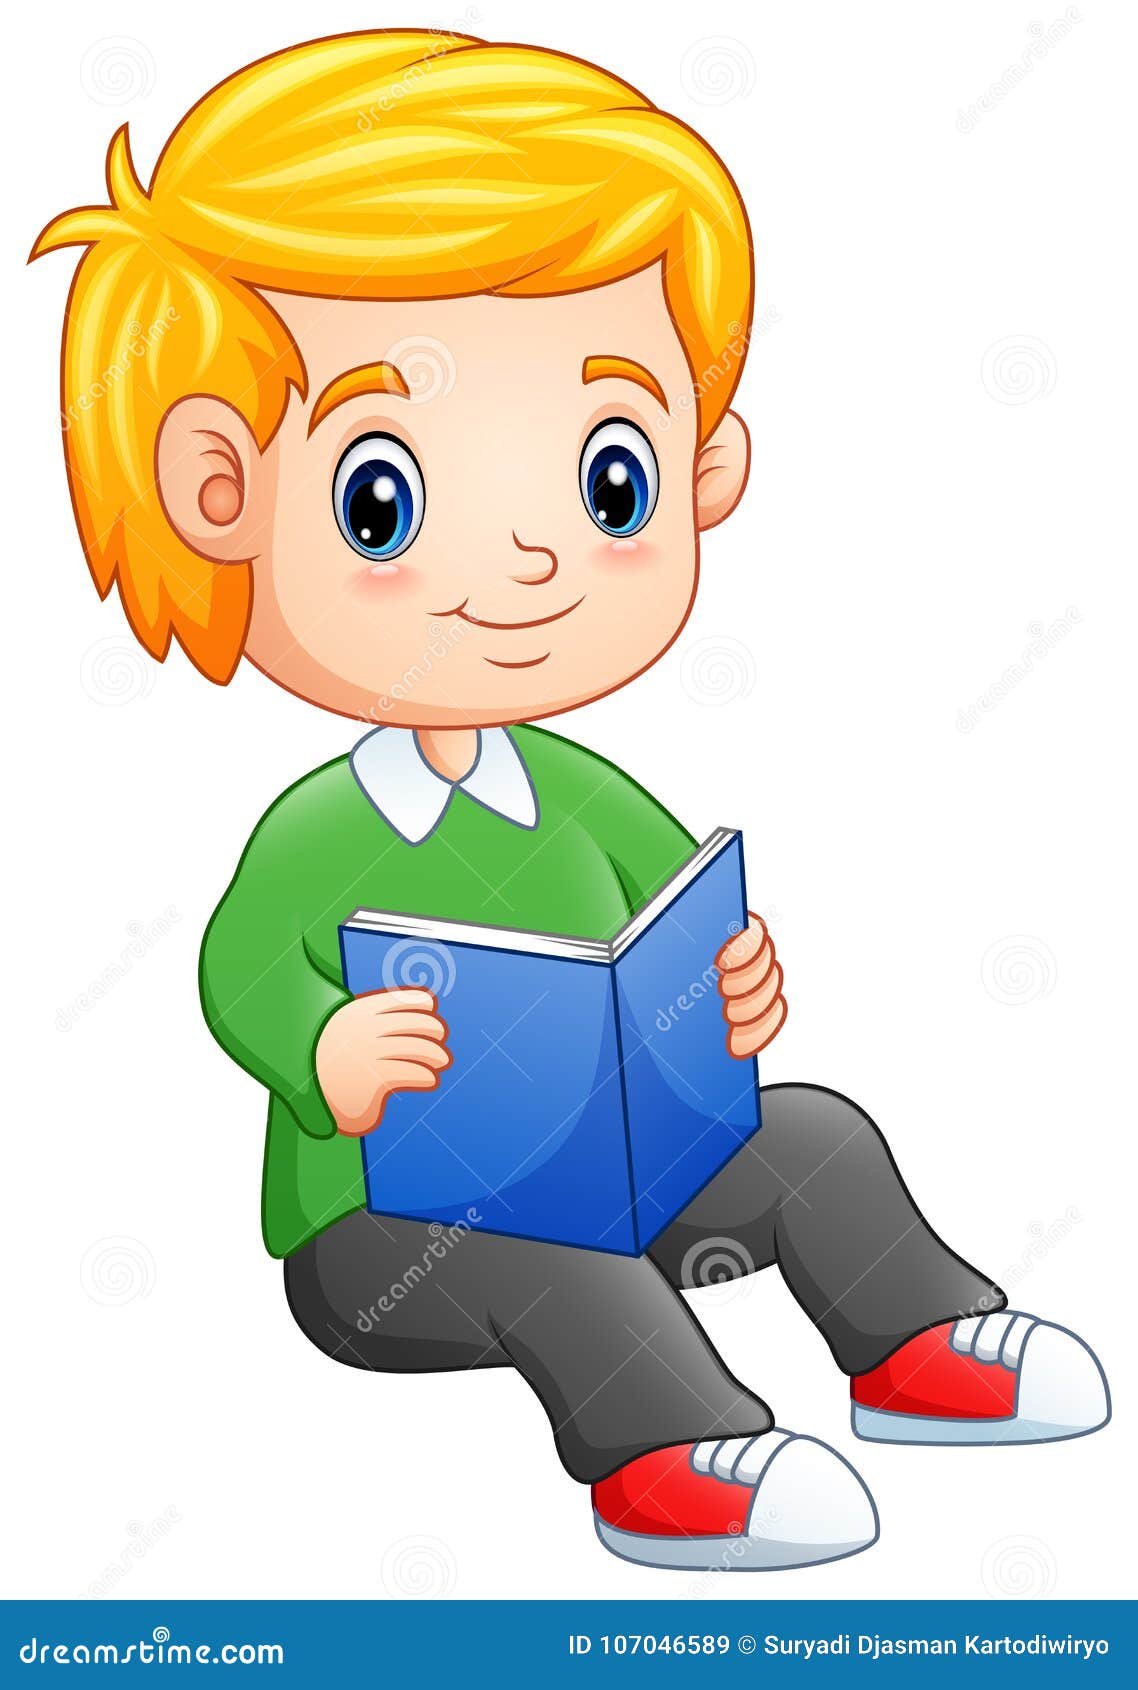 Little boy reading a book stock vector. Illustration of blonde - 107046589